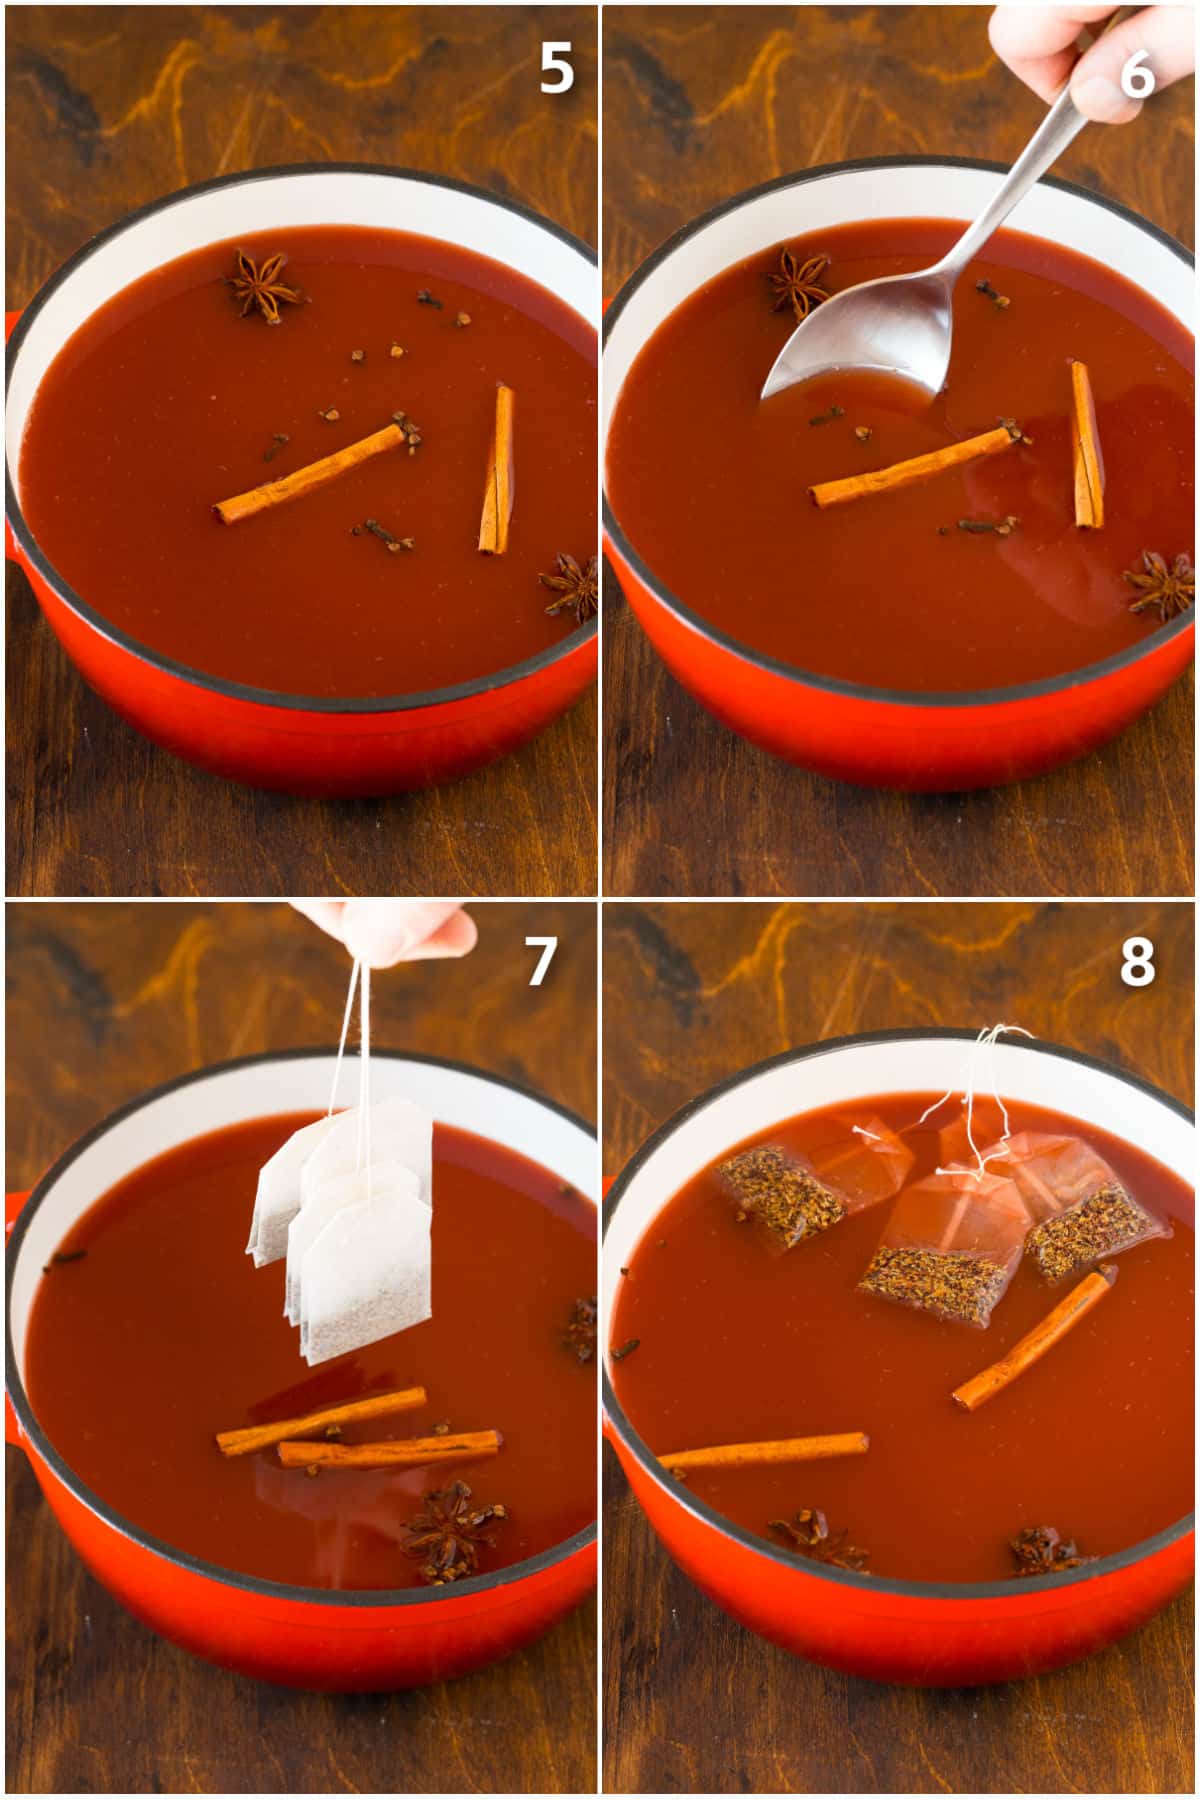 Cinnamon and tea bags being put into a pot of juices and sugar.